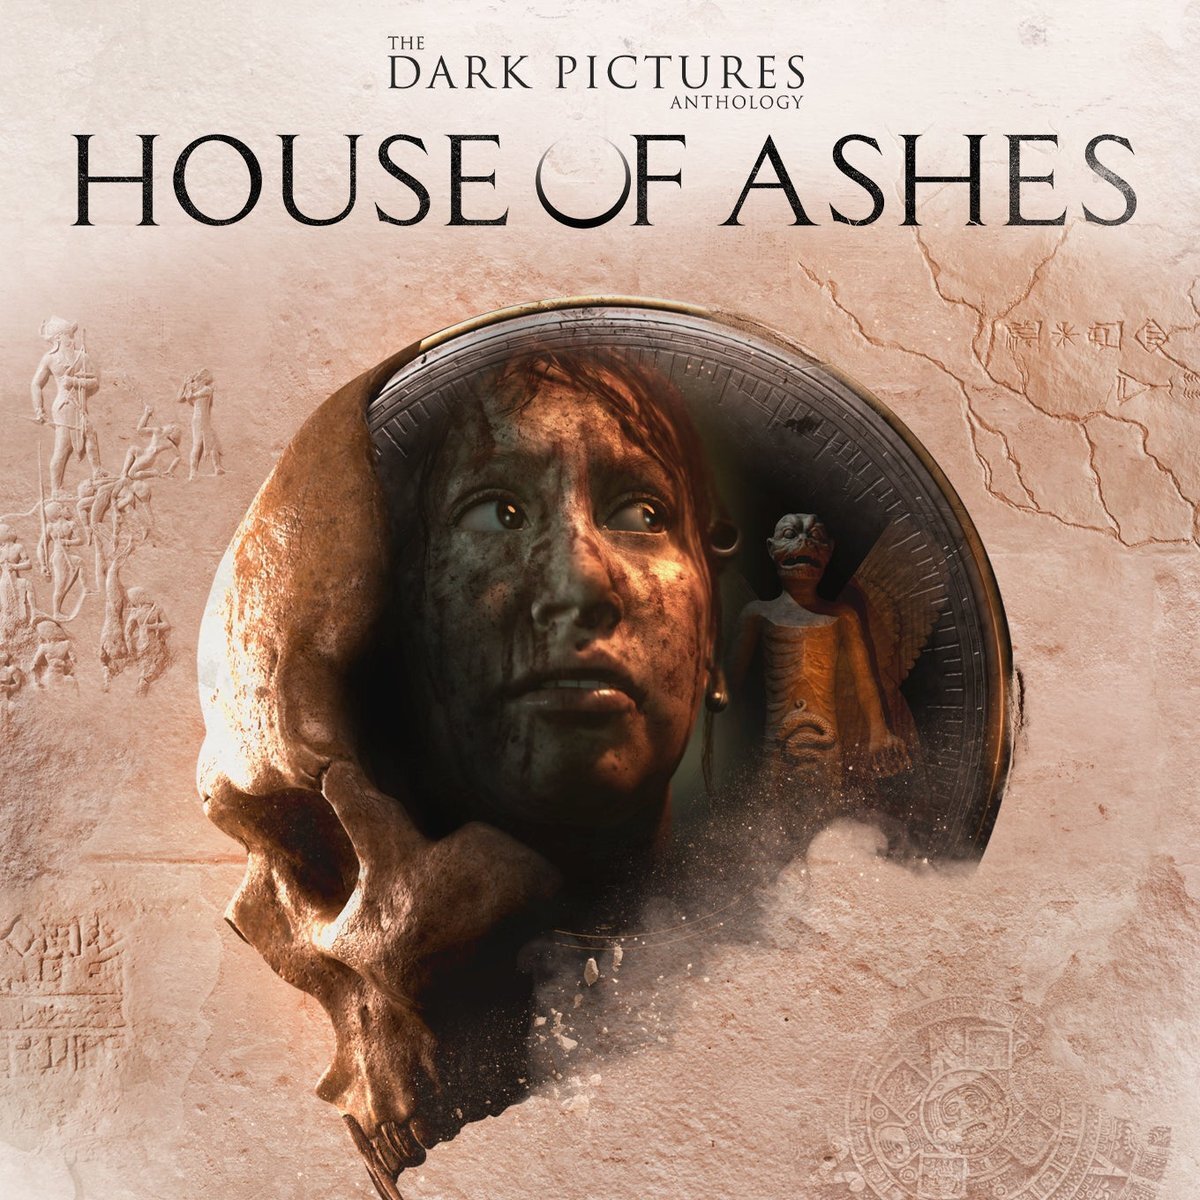 The dark pictures house of ashes steam фото 86